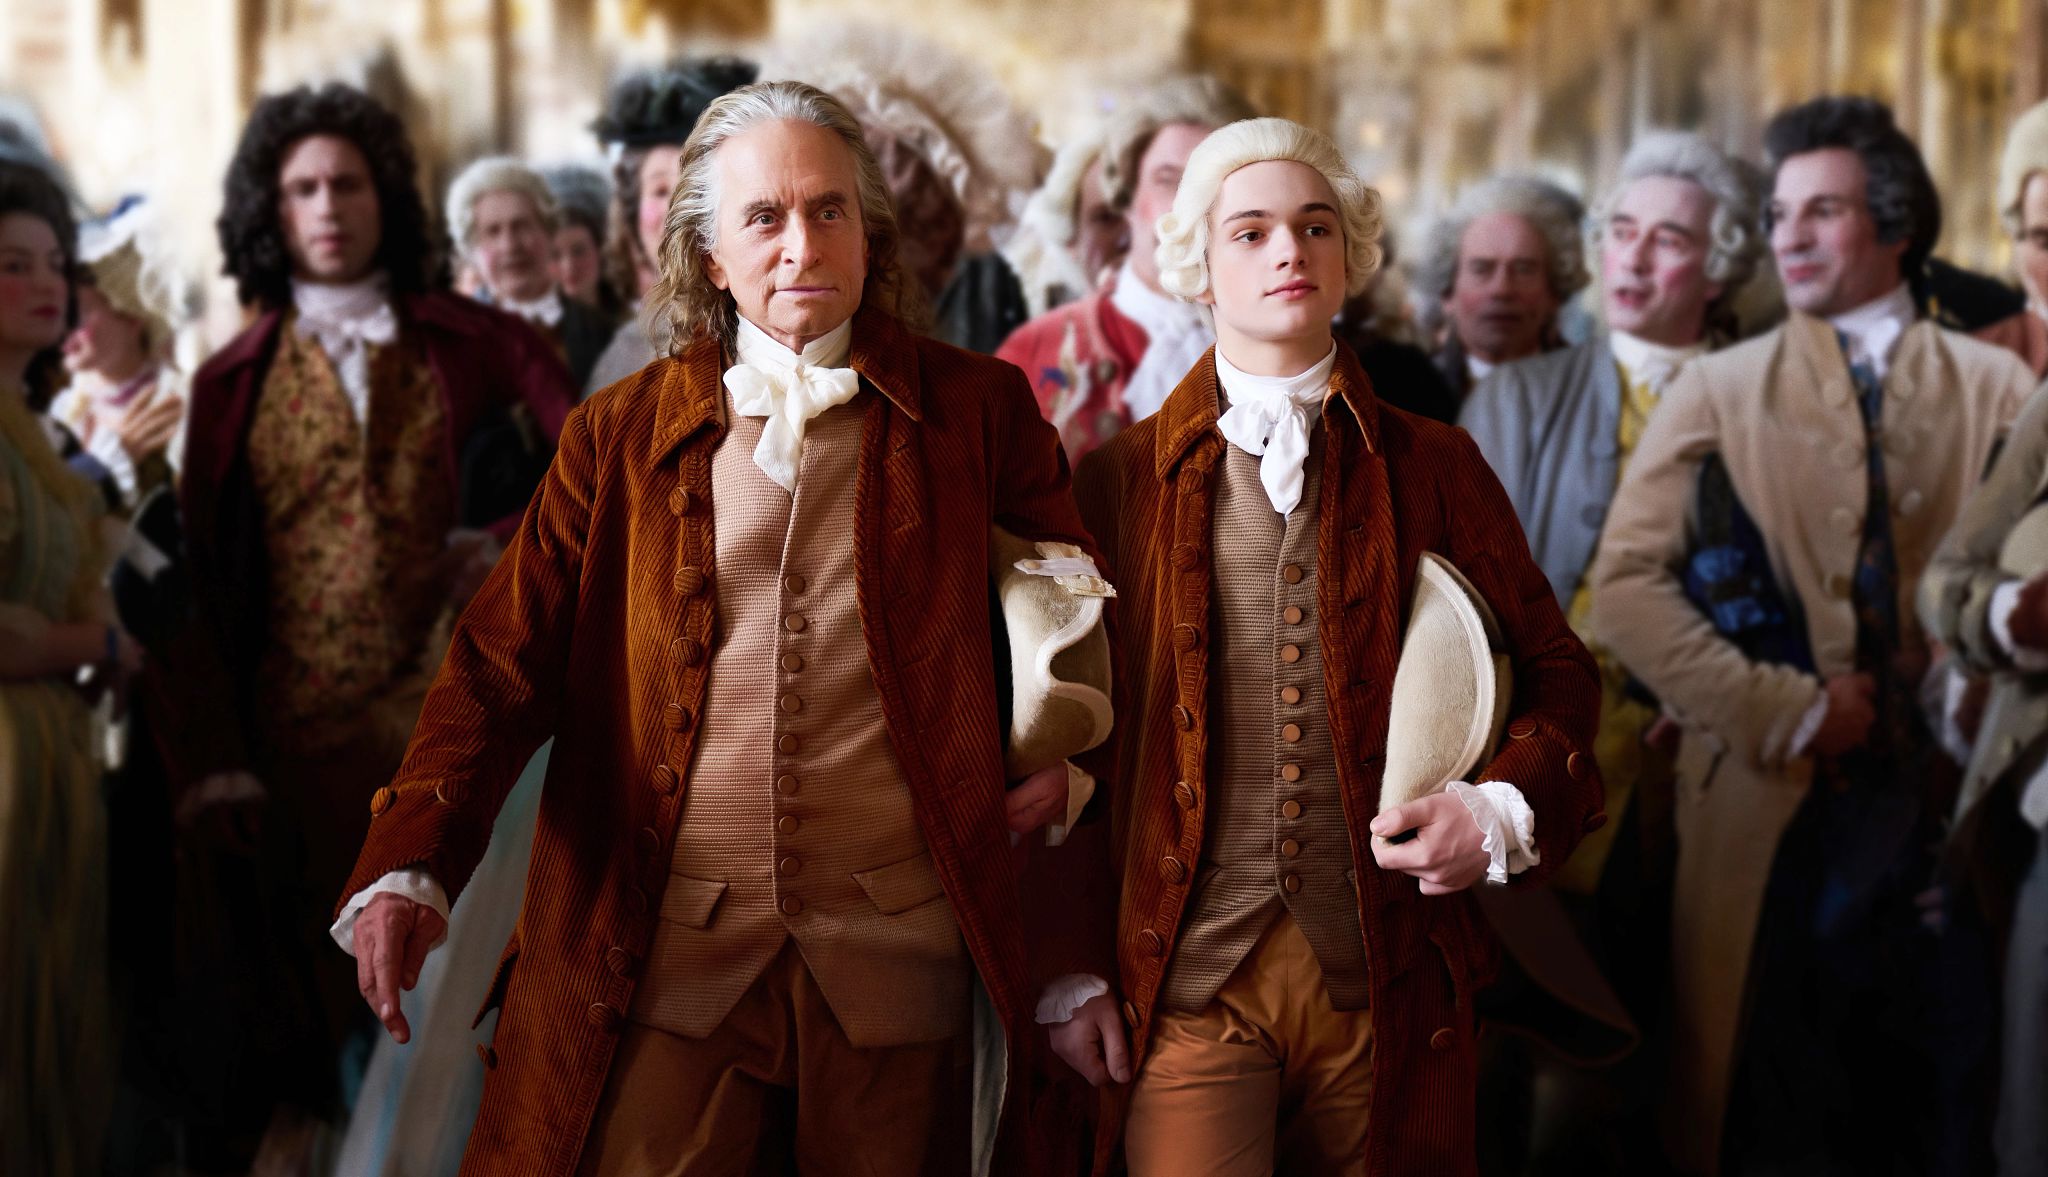 Michael Douglas and Noah Jupe walking together in a scene in the Apple TV Plus series Franklin